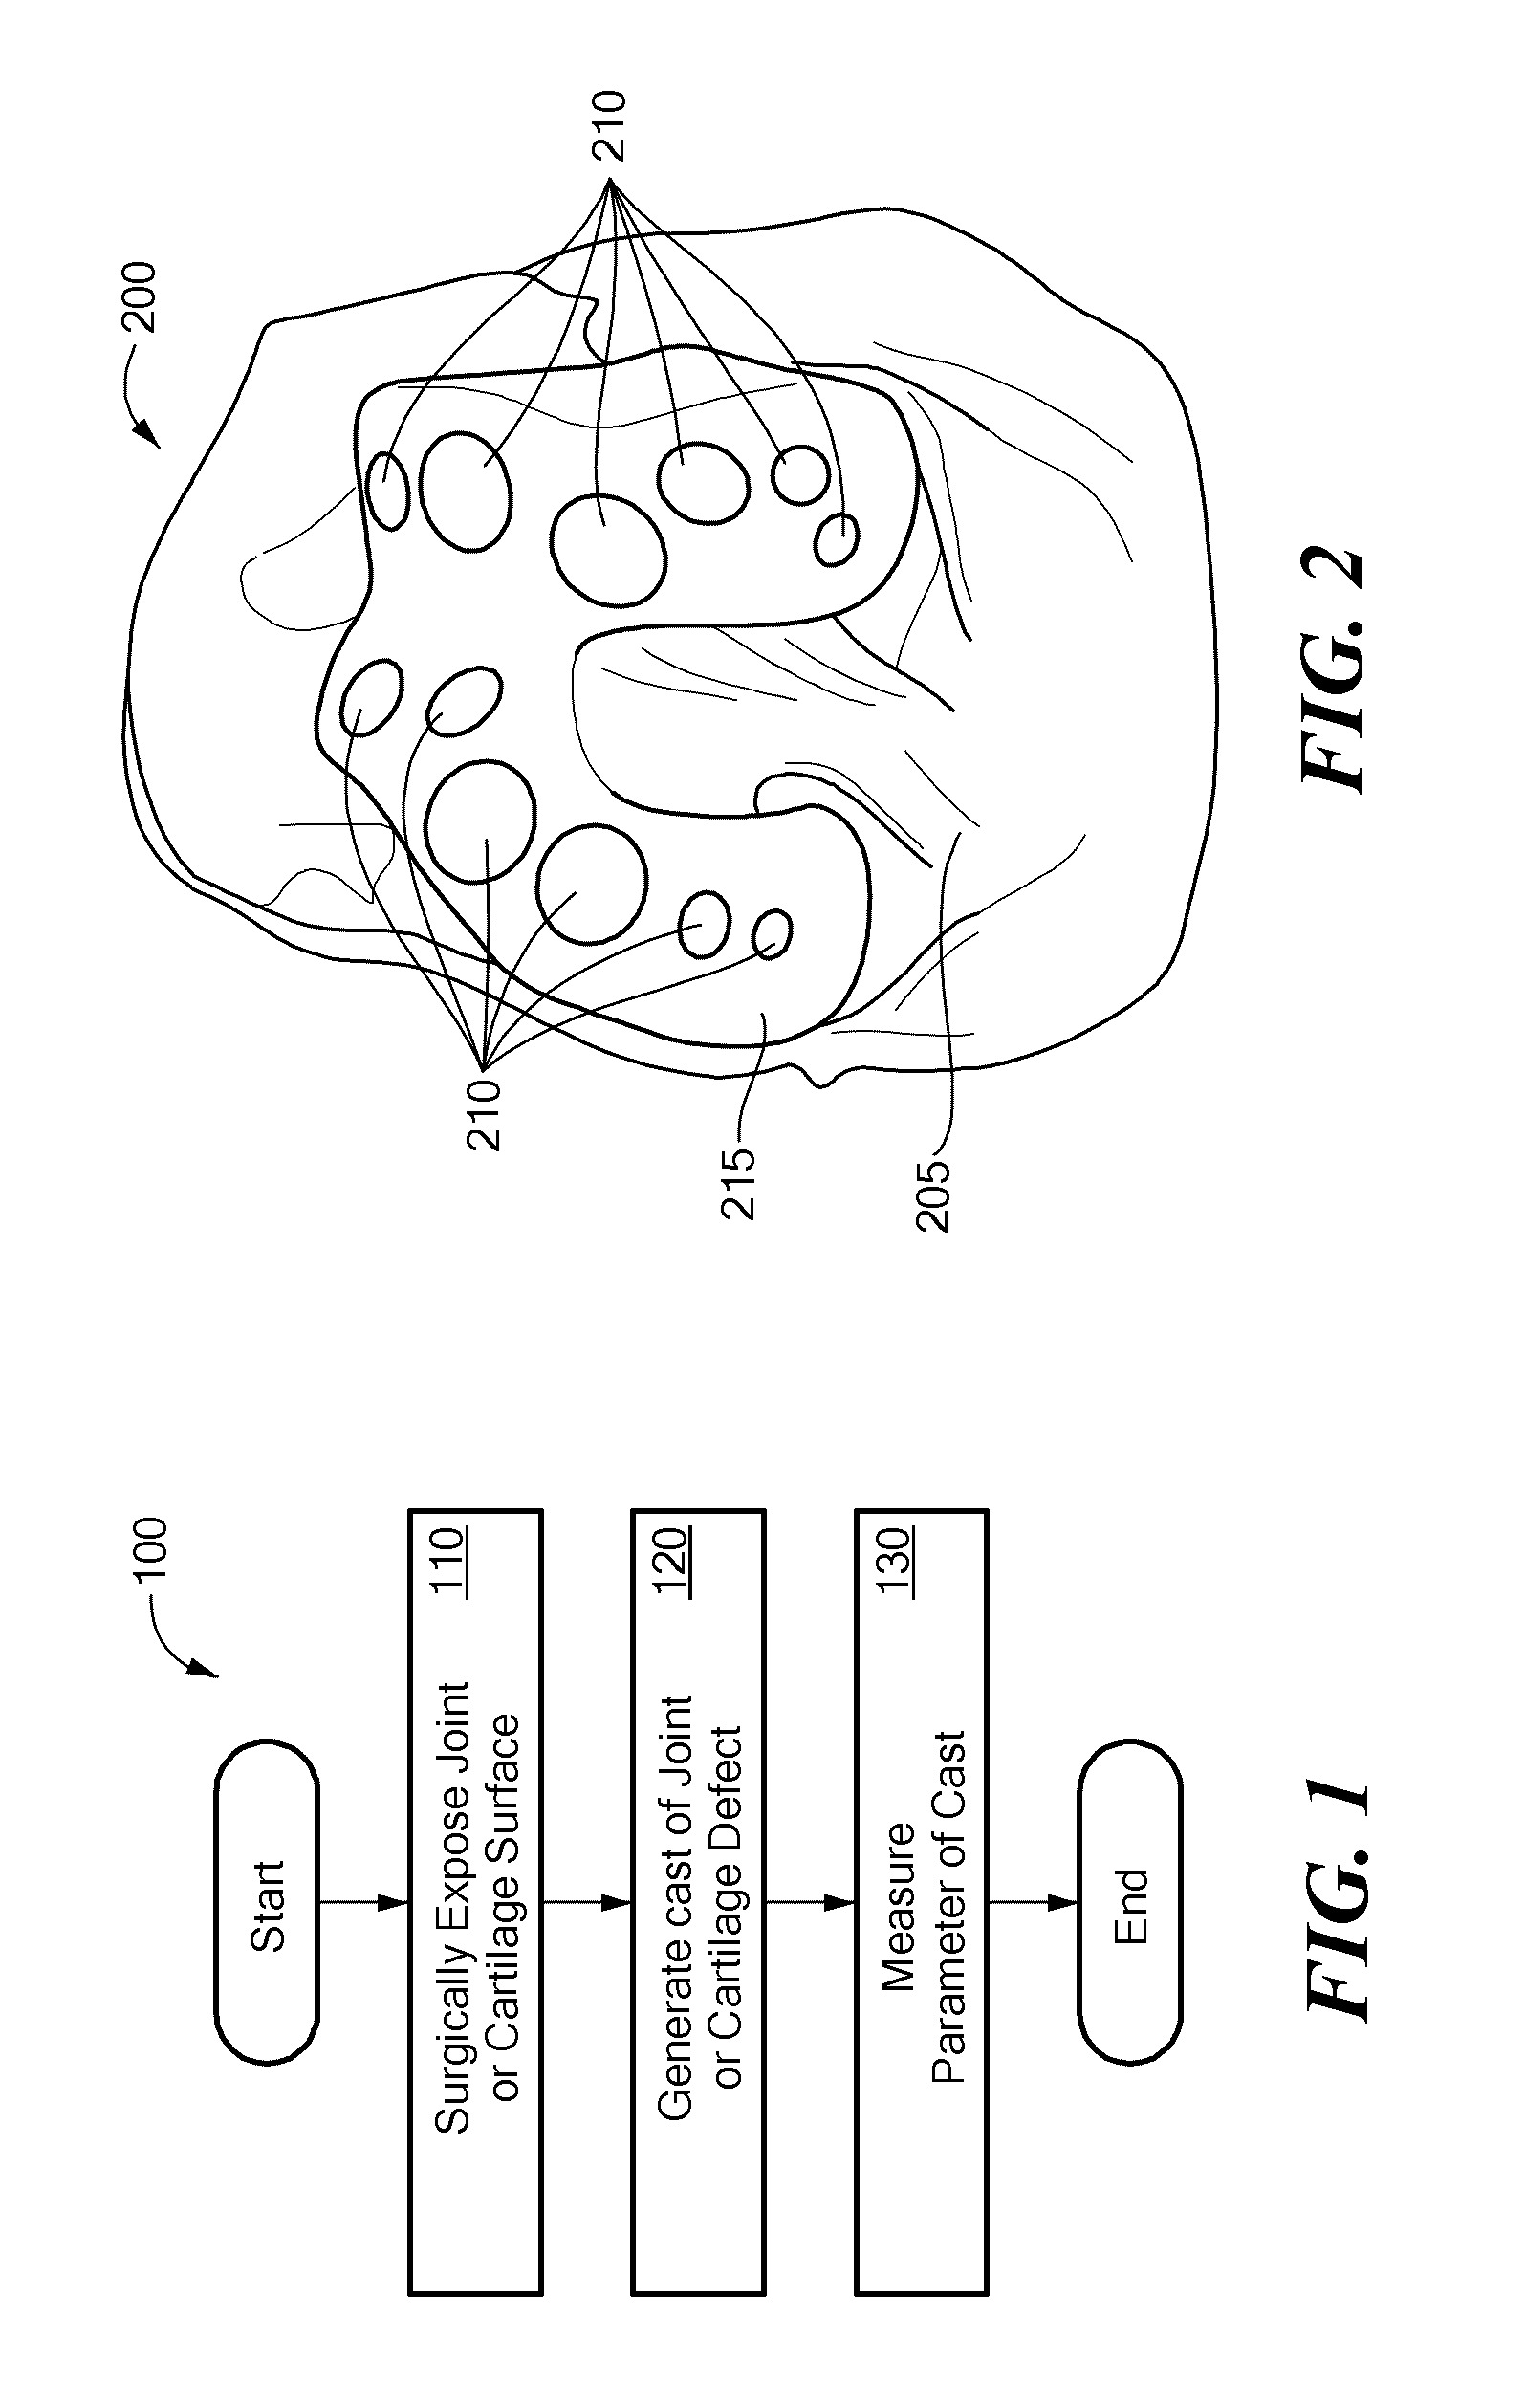 Methods and Devices For Quantitative Analysis of Bone and Cartilage Defects